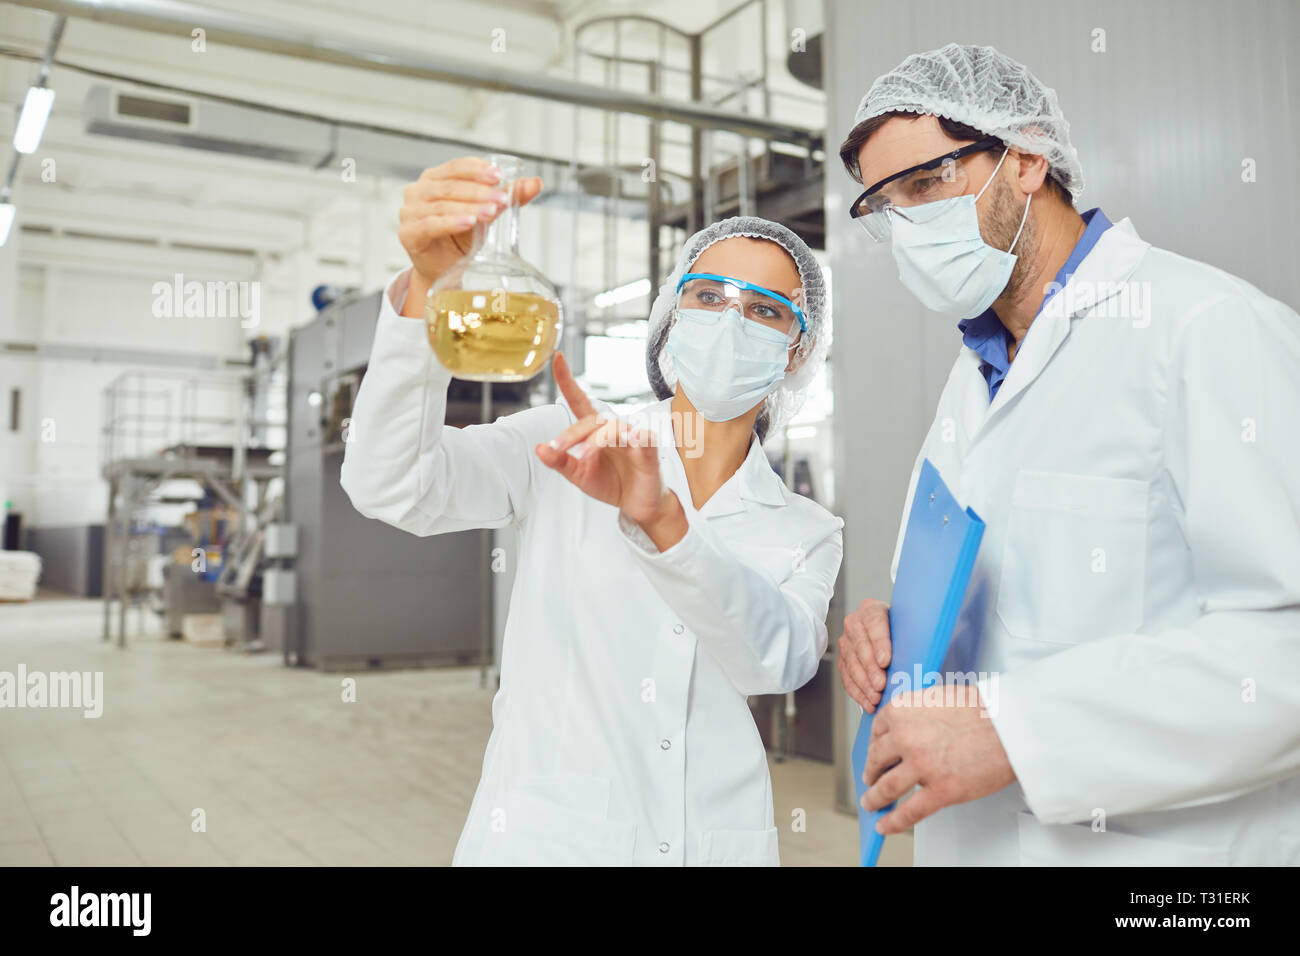 Workers in masks and coats look at the liquid in the flask at work Stock Photo